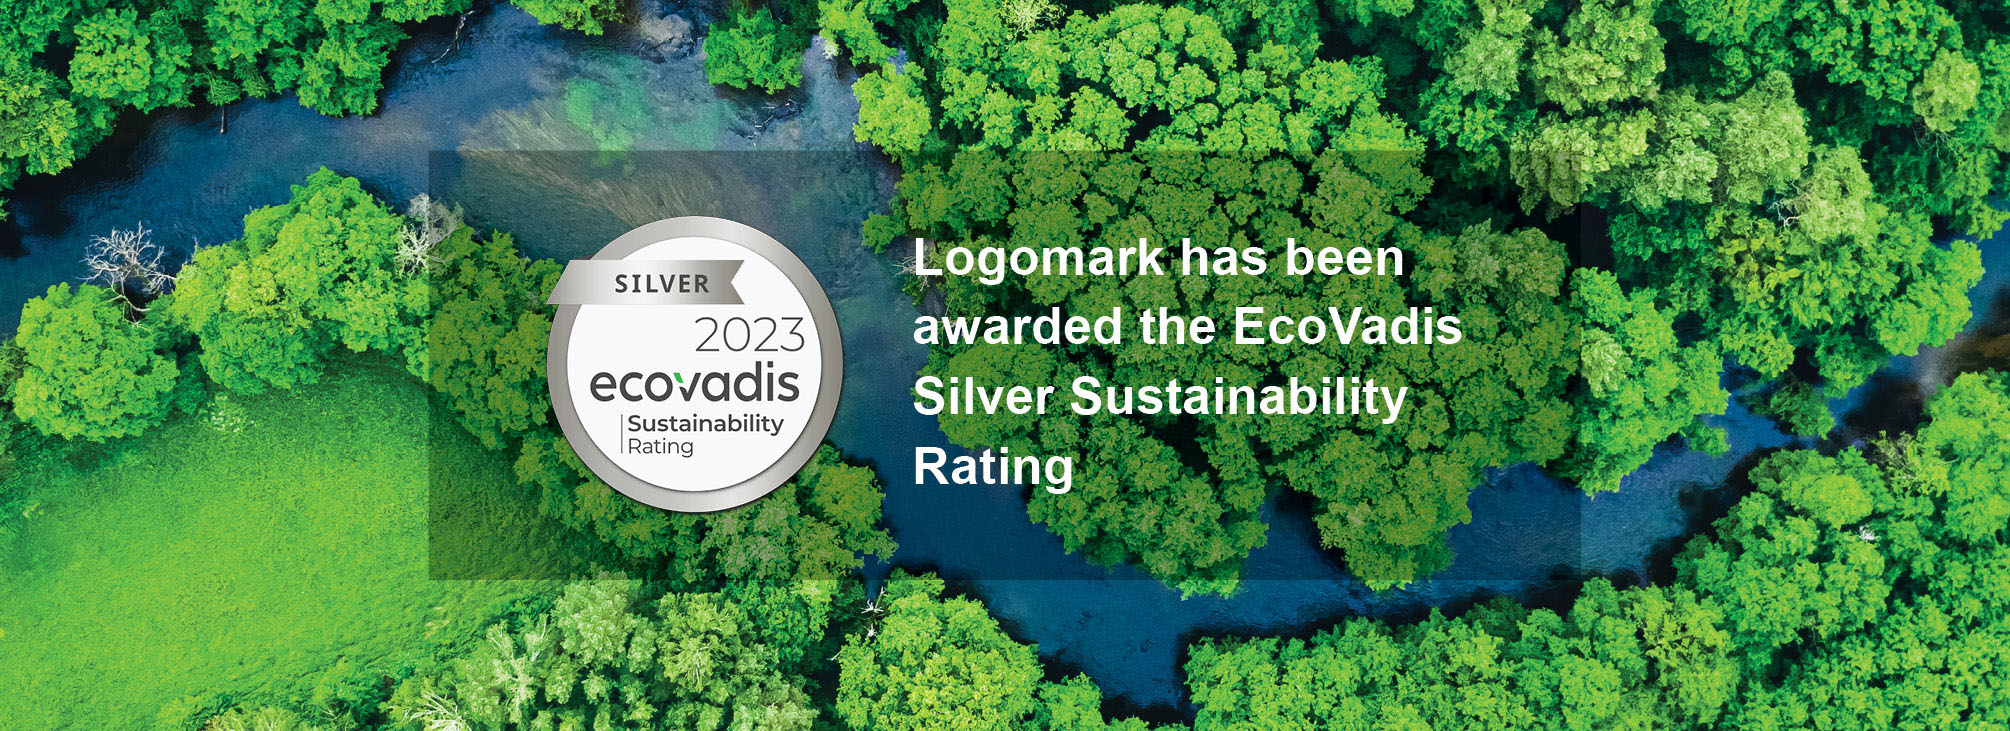 Logomark has been awarded the EcoVadis Silver Sustainability Rating